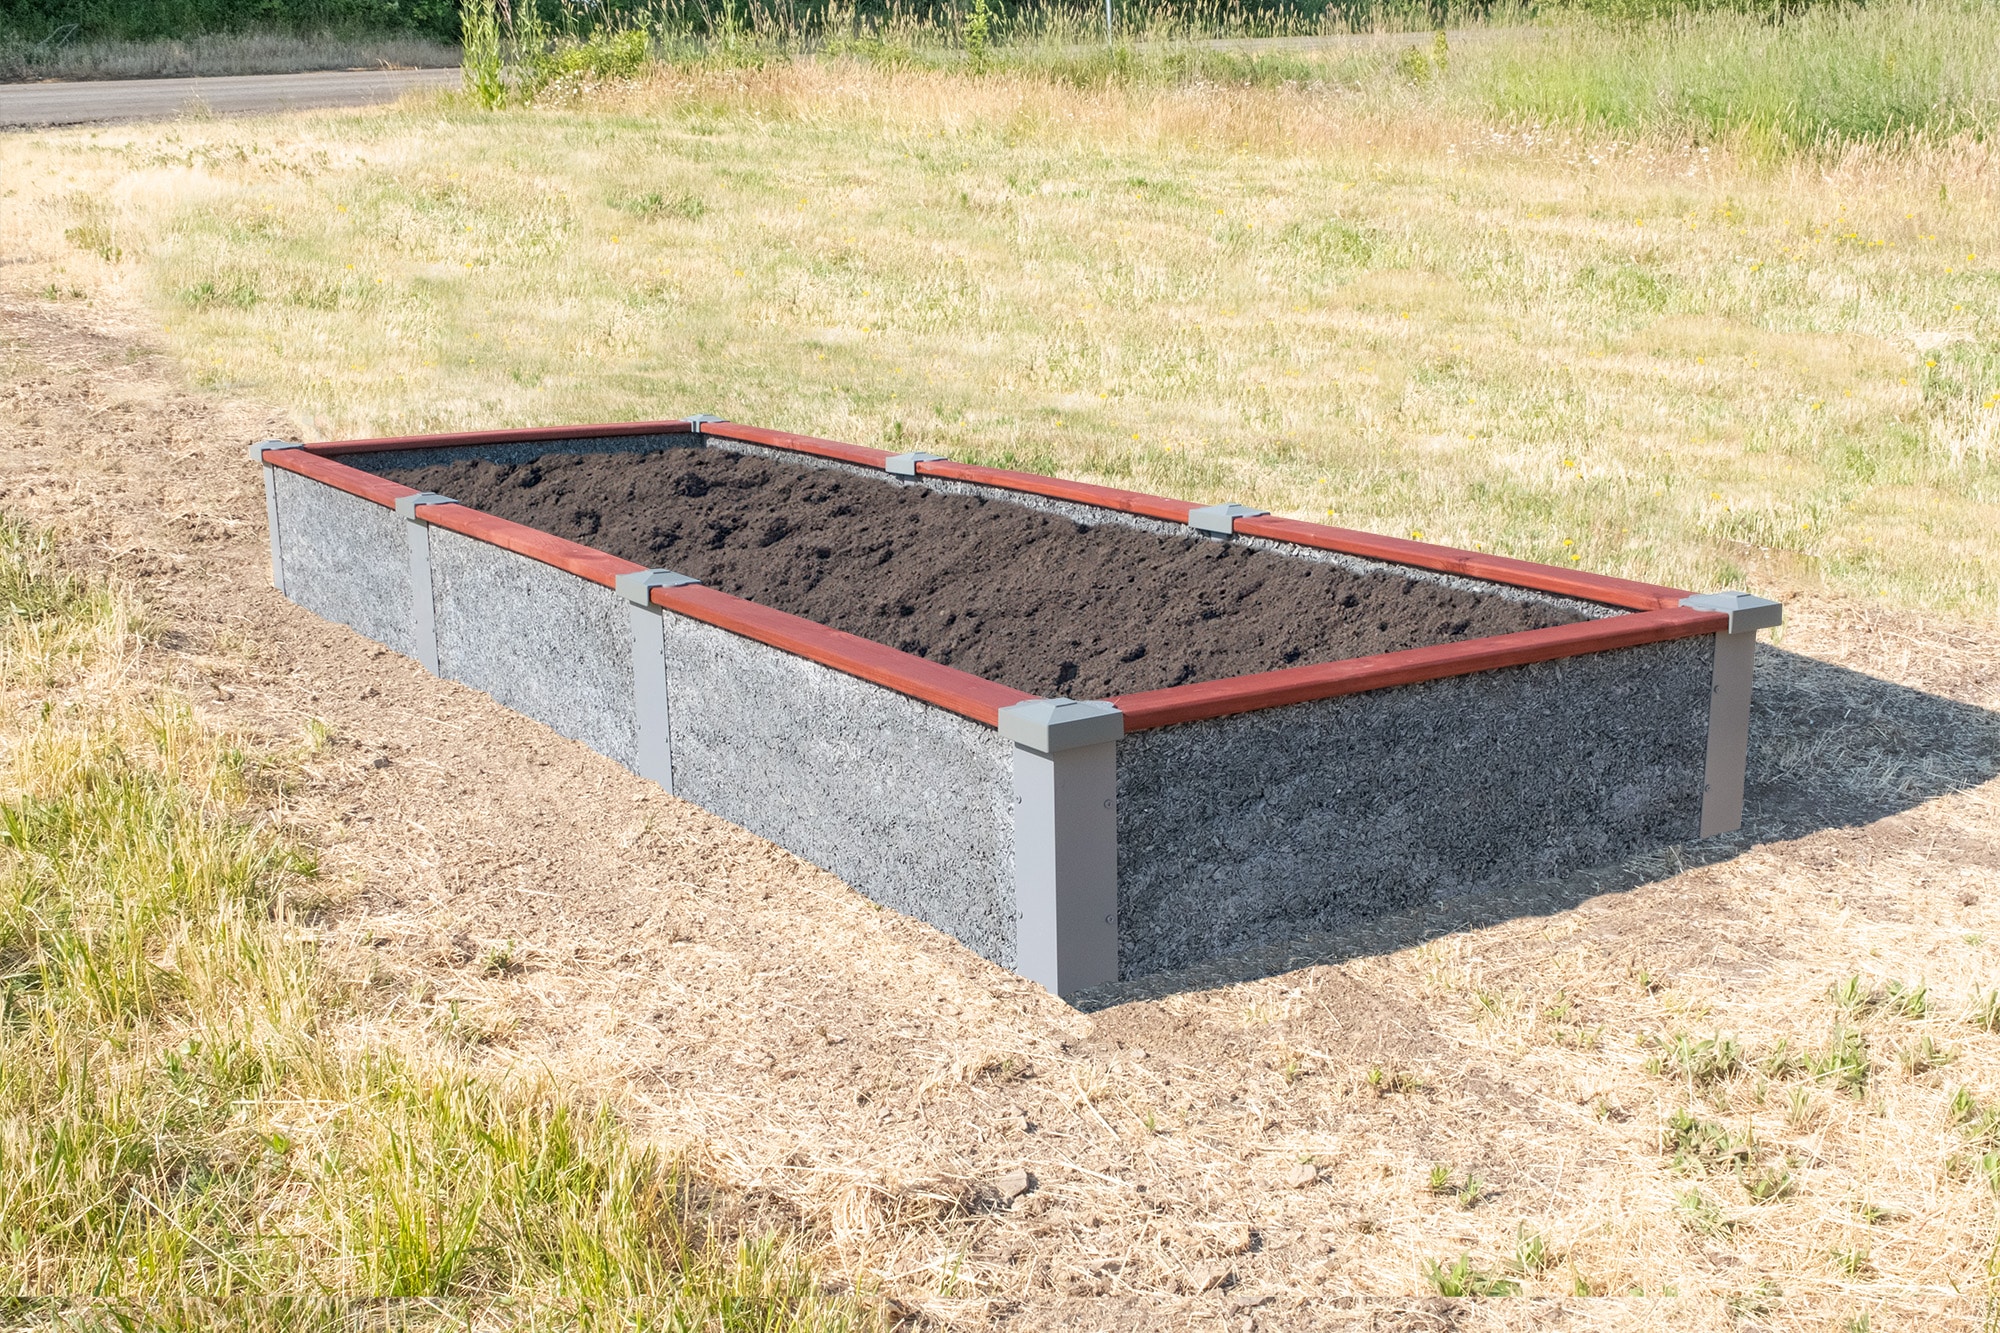 Long Rectangle Elevated Garden Bed Kit